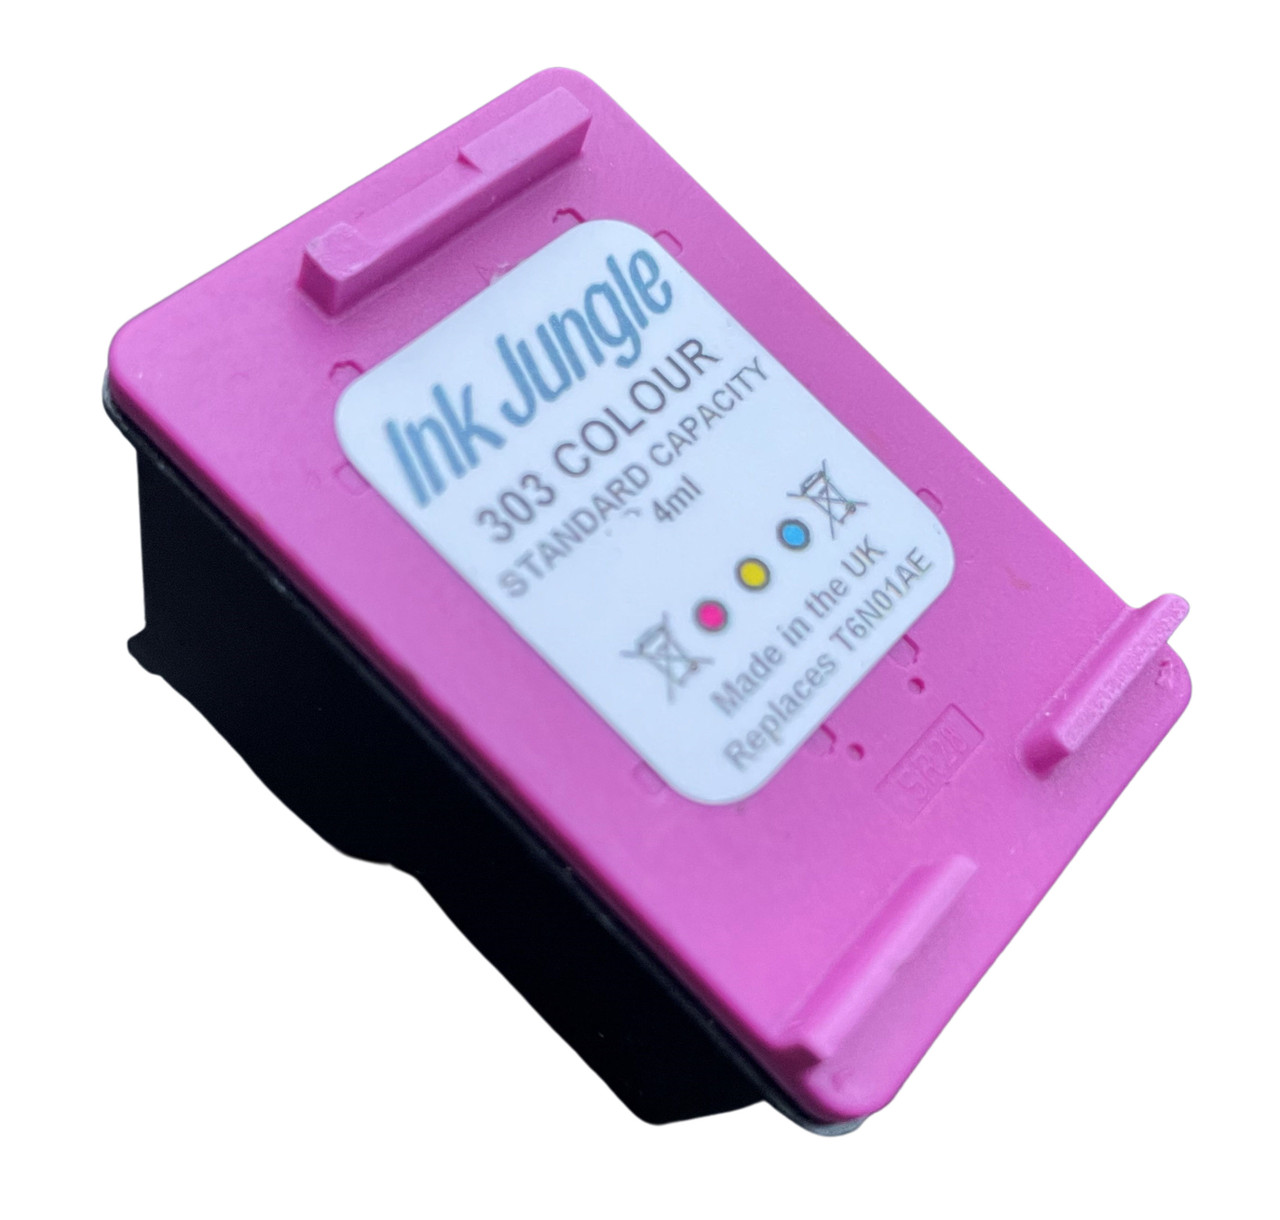 Refilled HP 304 Black & Colour Ink Cartridge. £22.95 free delivery